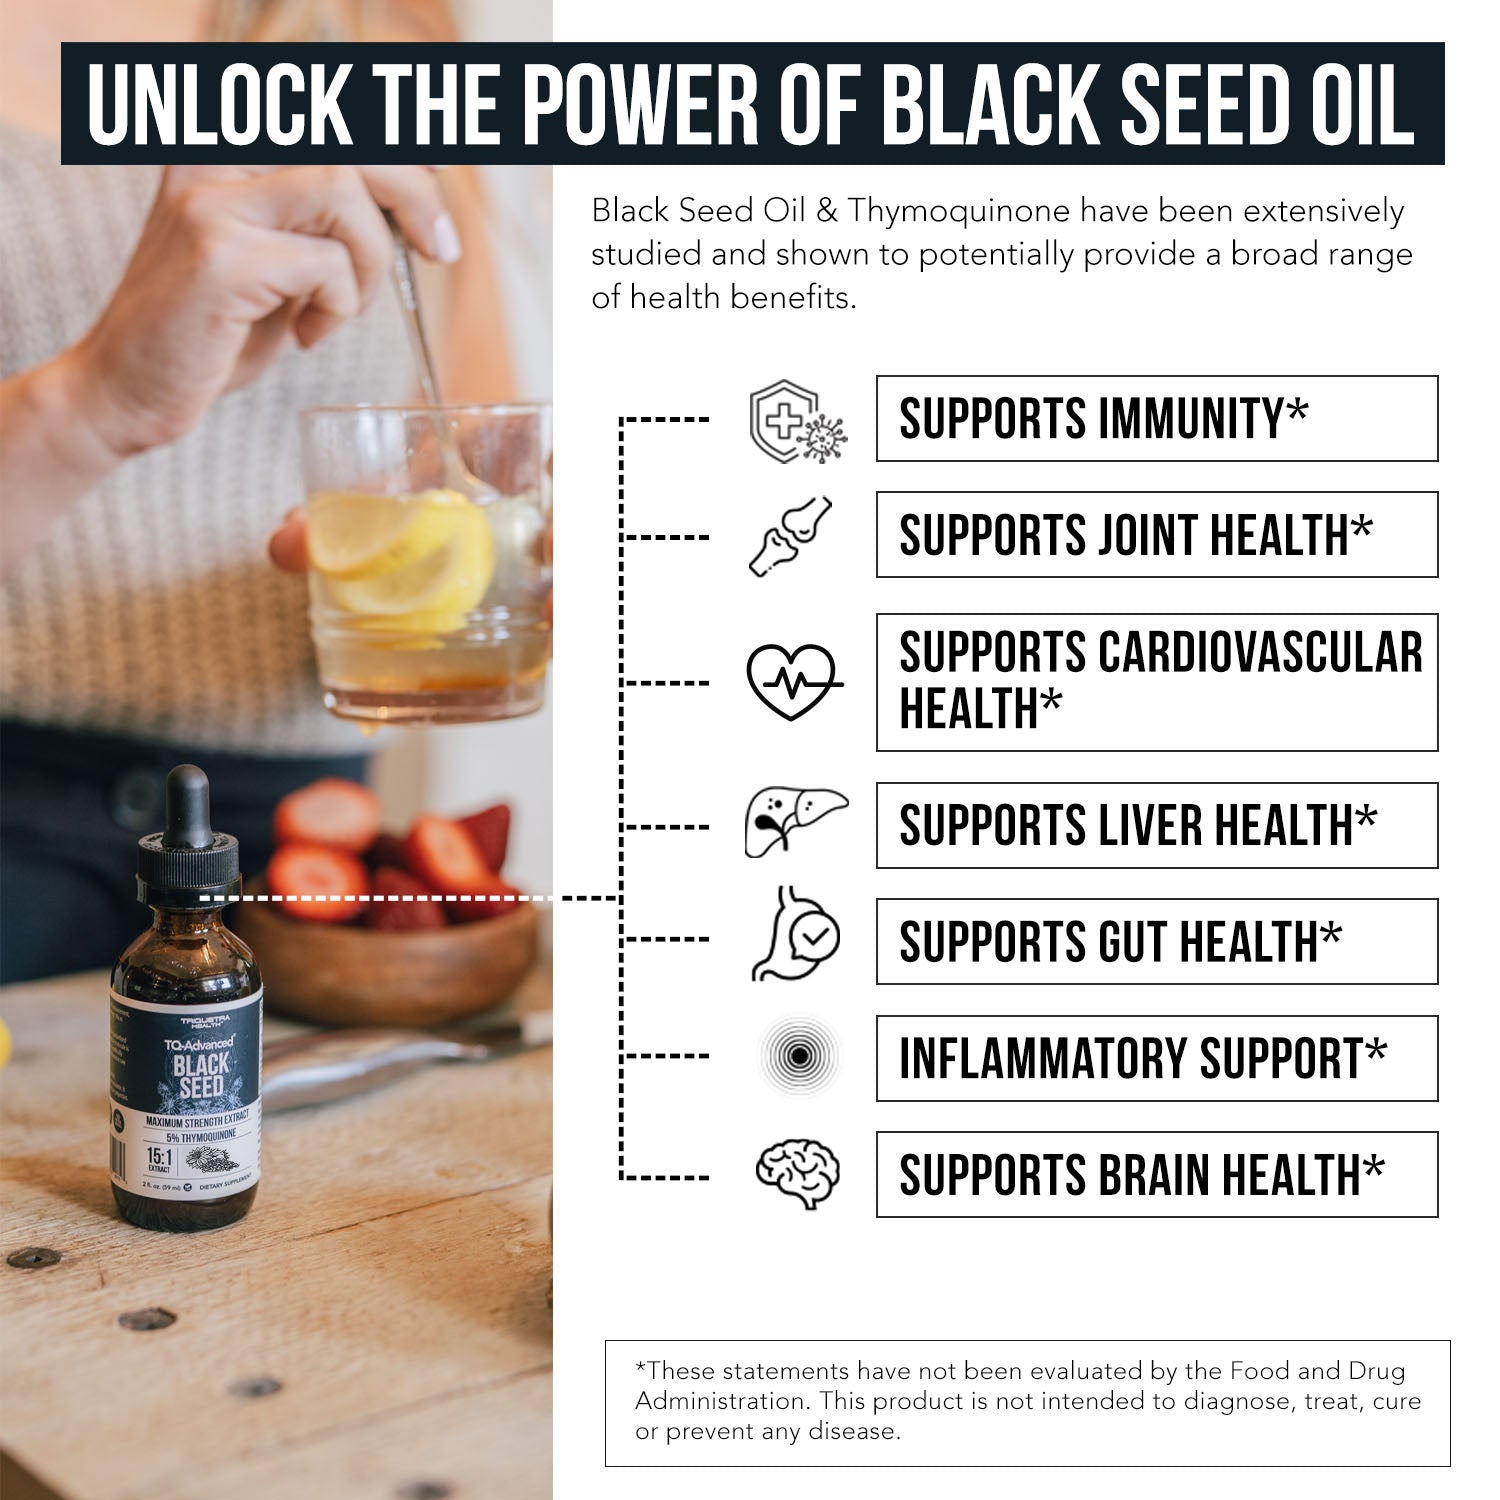 7 Crazy Benefits of Black Seed Oil For Hair